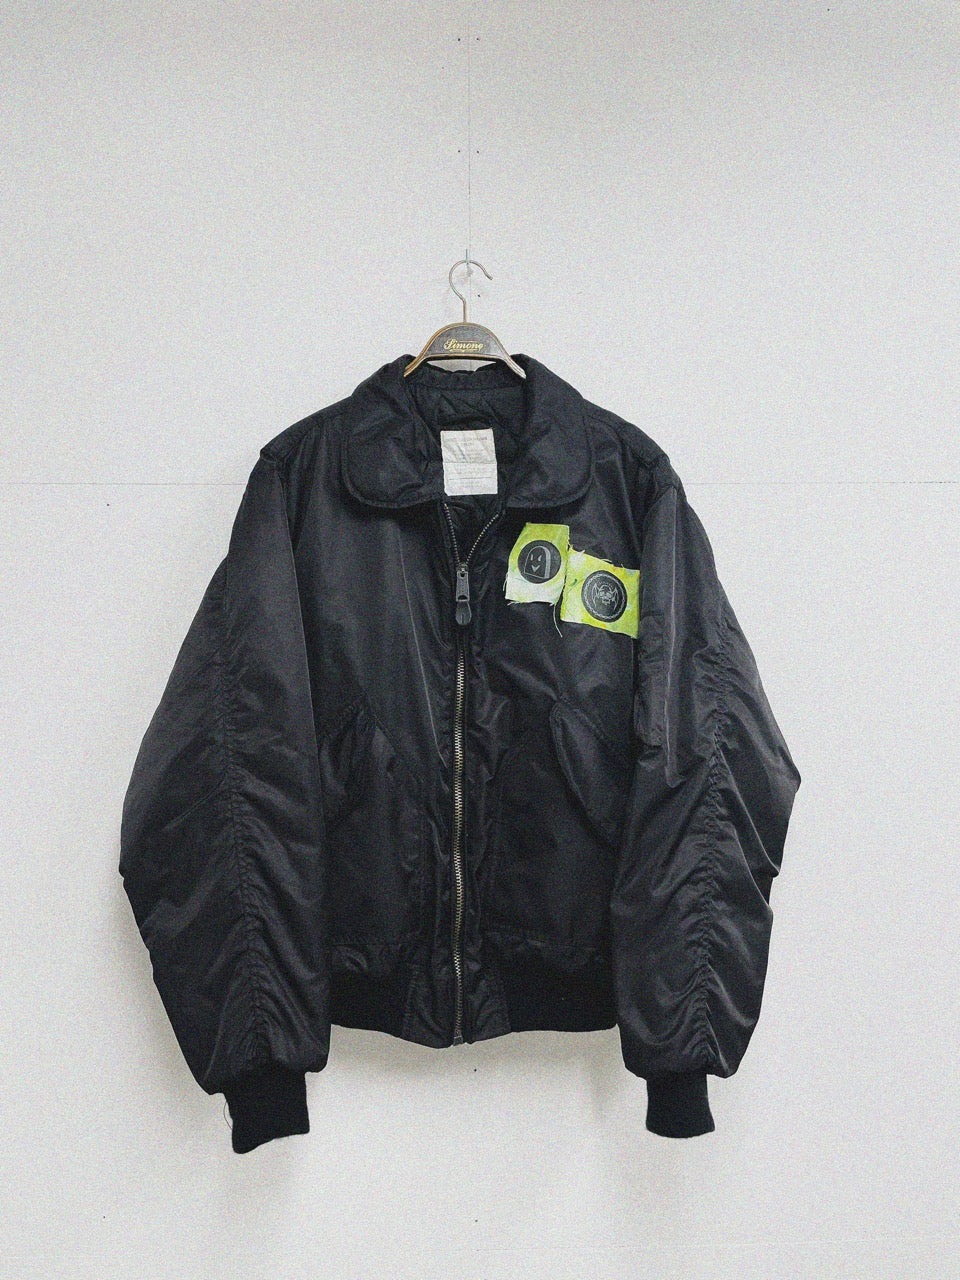 BOMBER JACKET OS by death